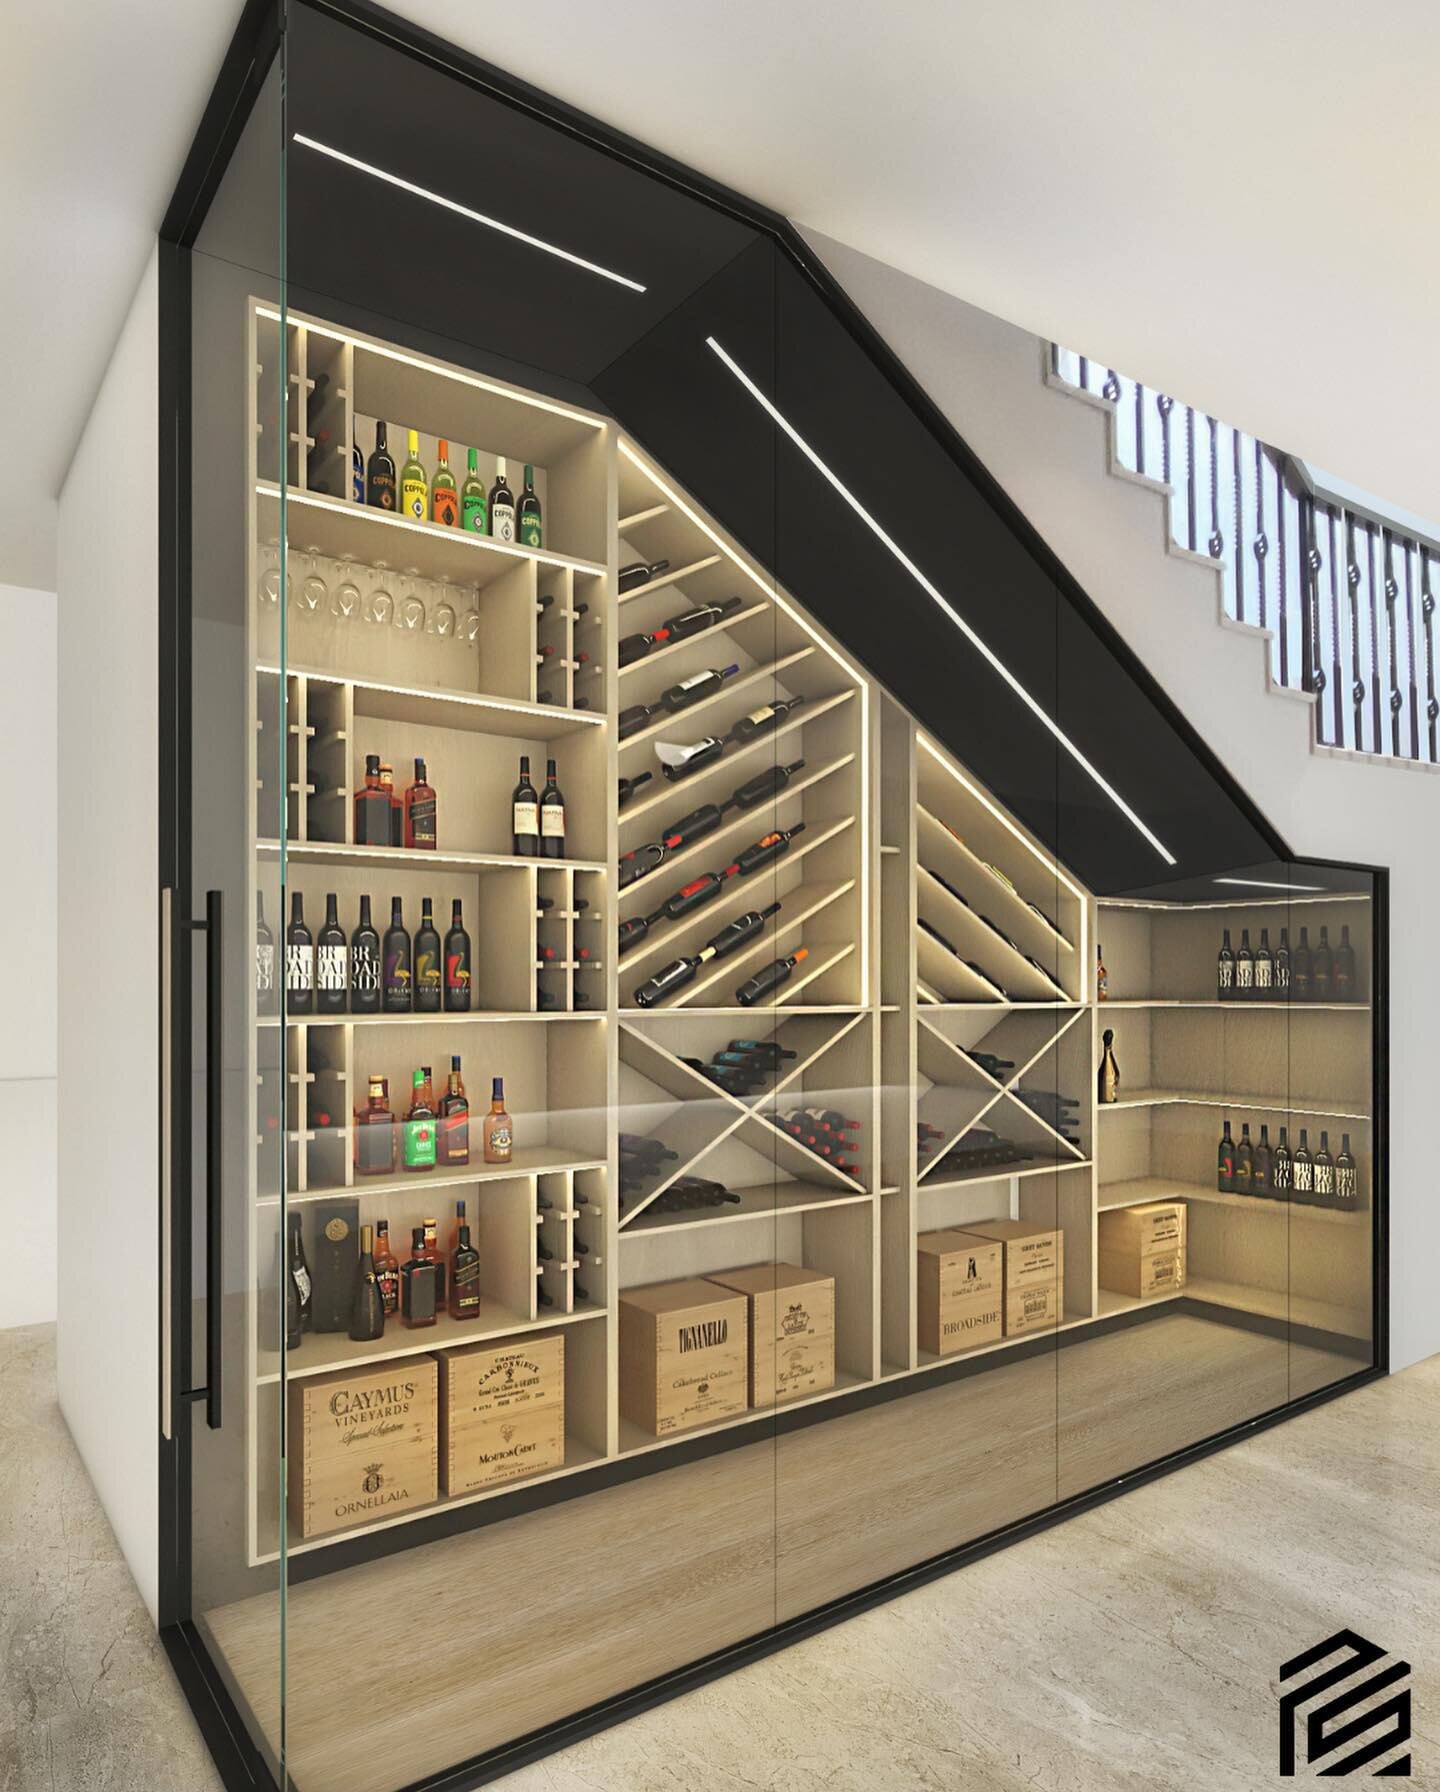 If you have a special project in mind, but you&rsquo;re not sure how it can become a reality, then it&rsquo;s time for interior design! 

This space under the staircase was completely reimagined as a vintage wine cellar with:
&gt;&gt; parquet floorin